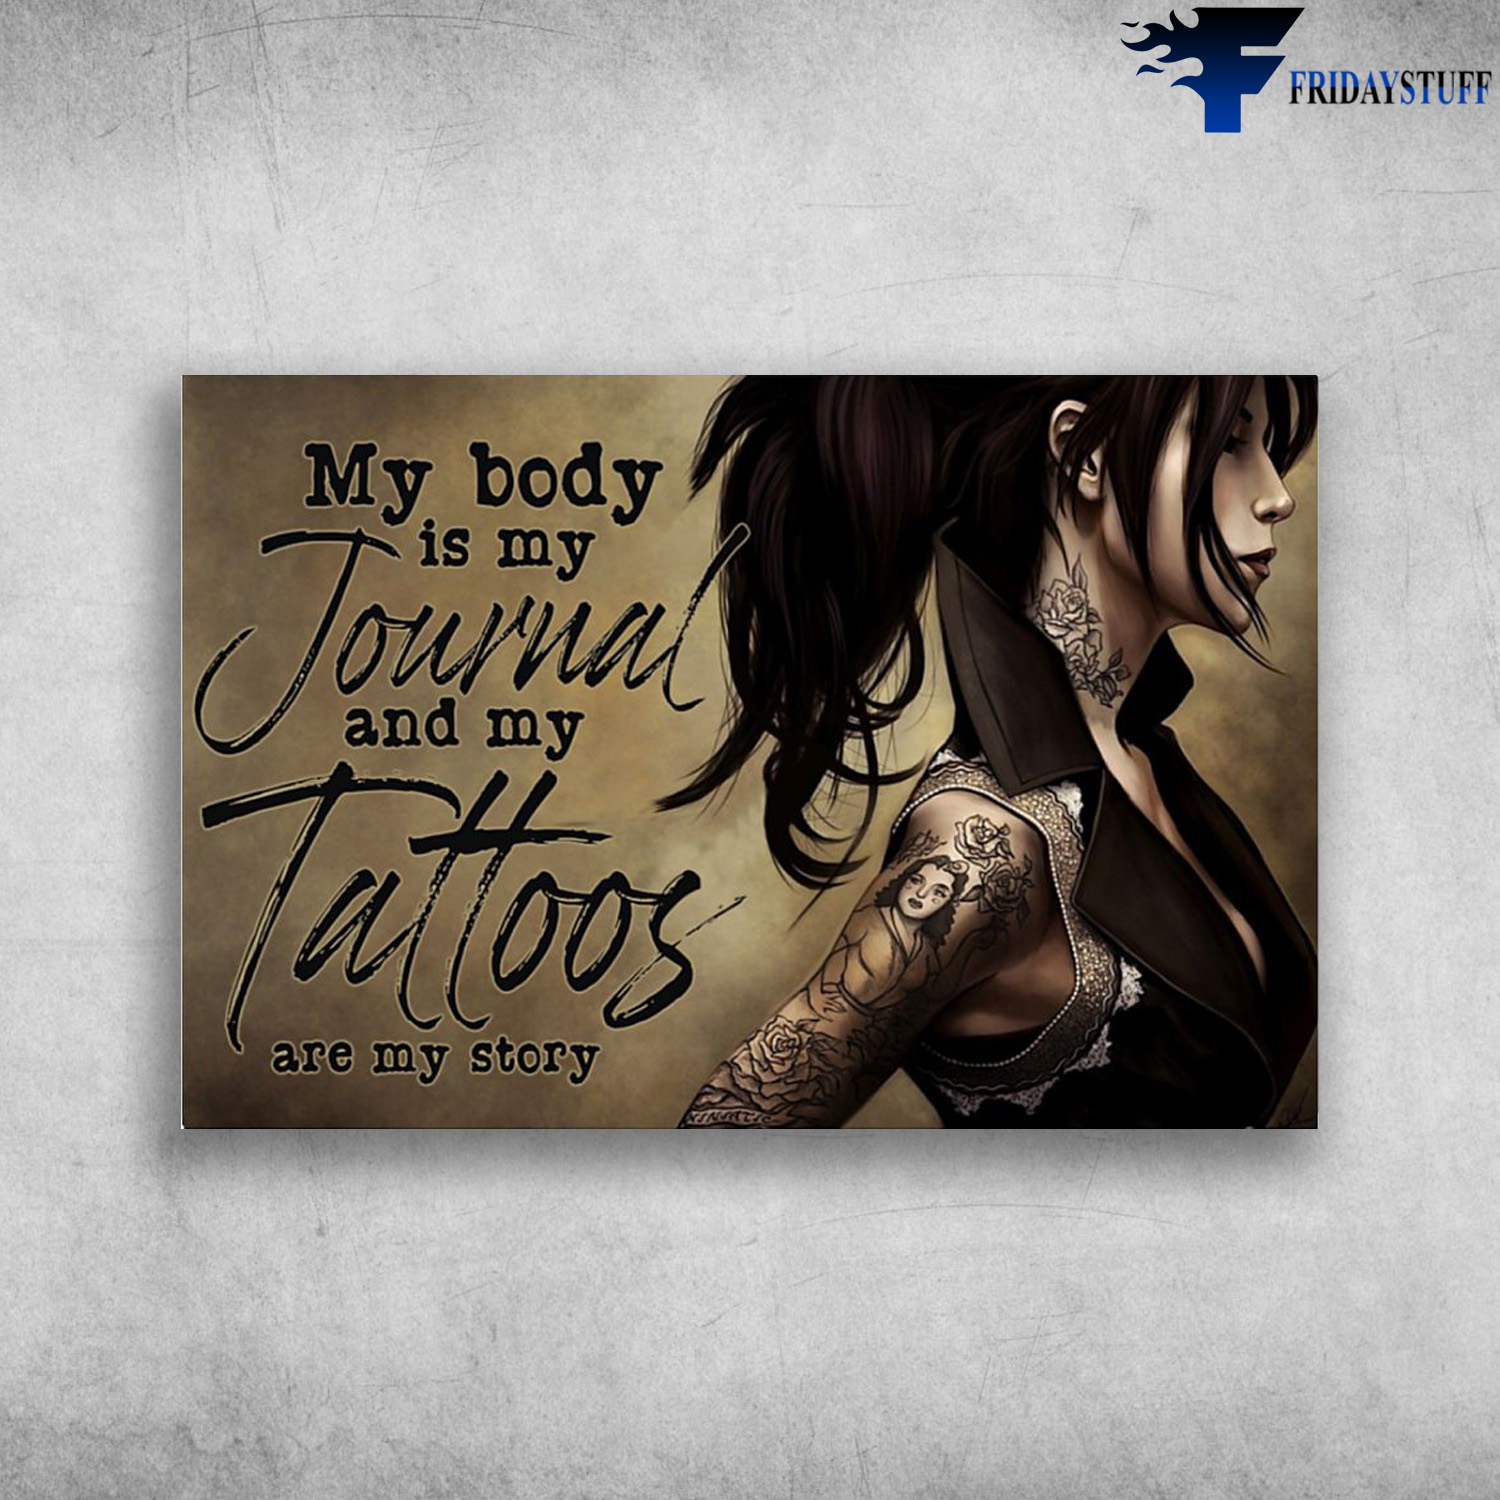 Tattoos Girl - My Body Is My Journal, And My Tattos Are My Story